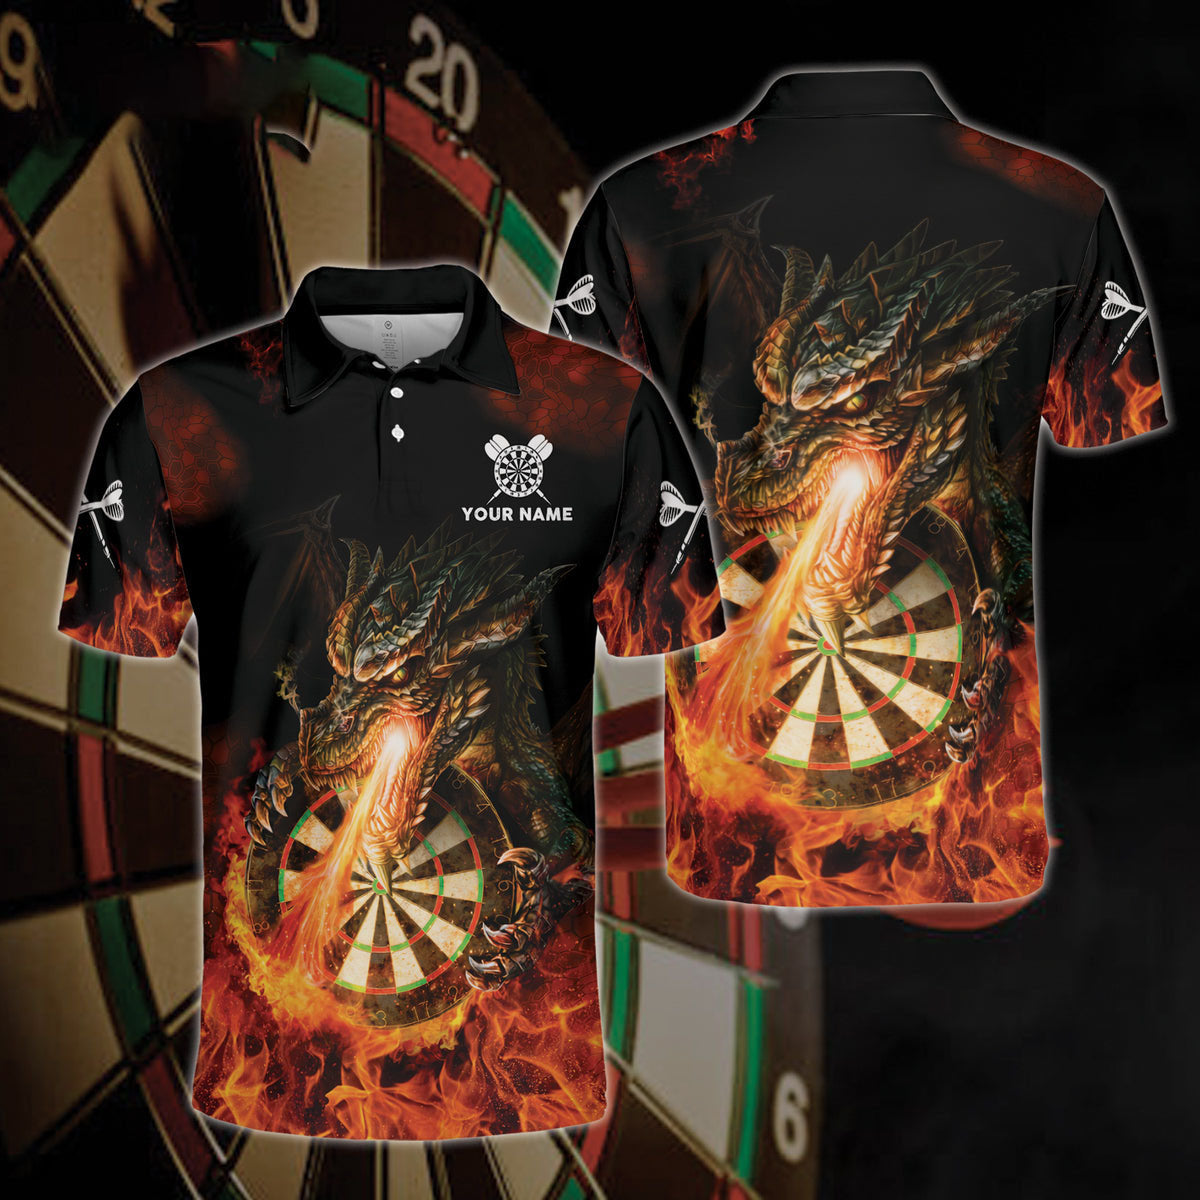 Personalized Name Dragon Fire Darts All Over Printed Unisex Shirt/ Uniform for Dart Team/ Dart Player